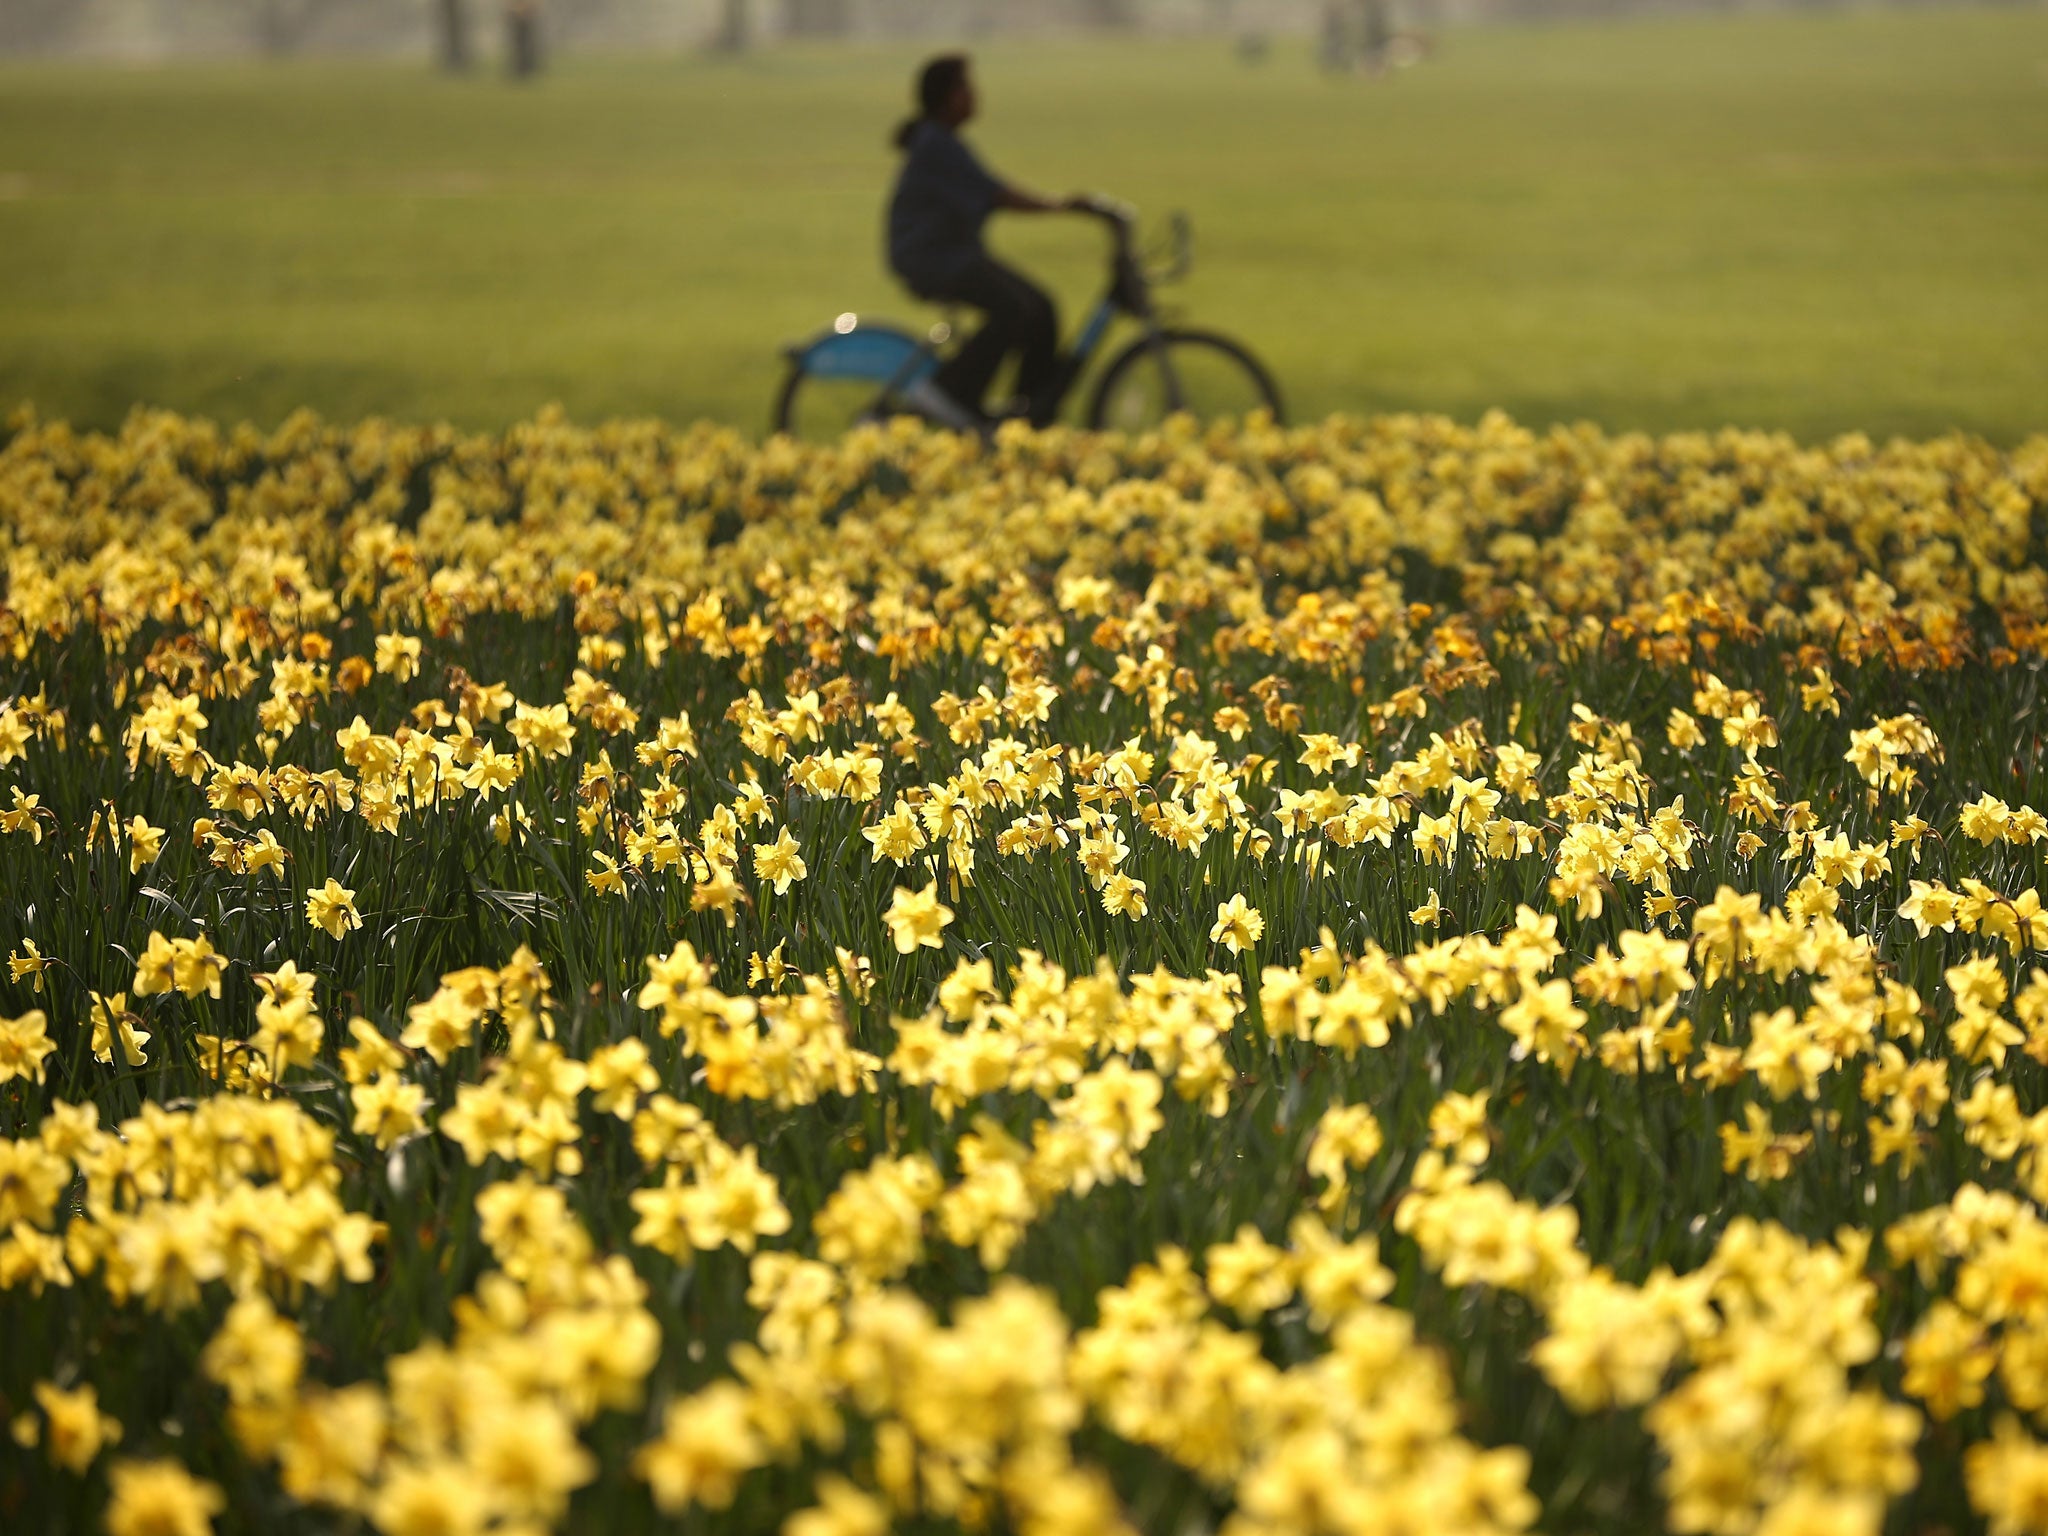 A cyclist passes a bank of daffodils in Hyde Park, London.